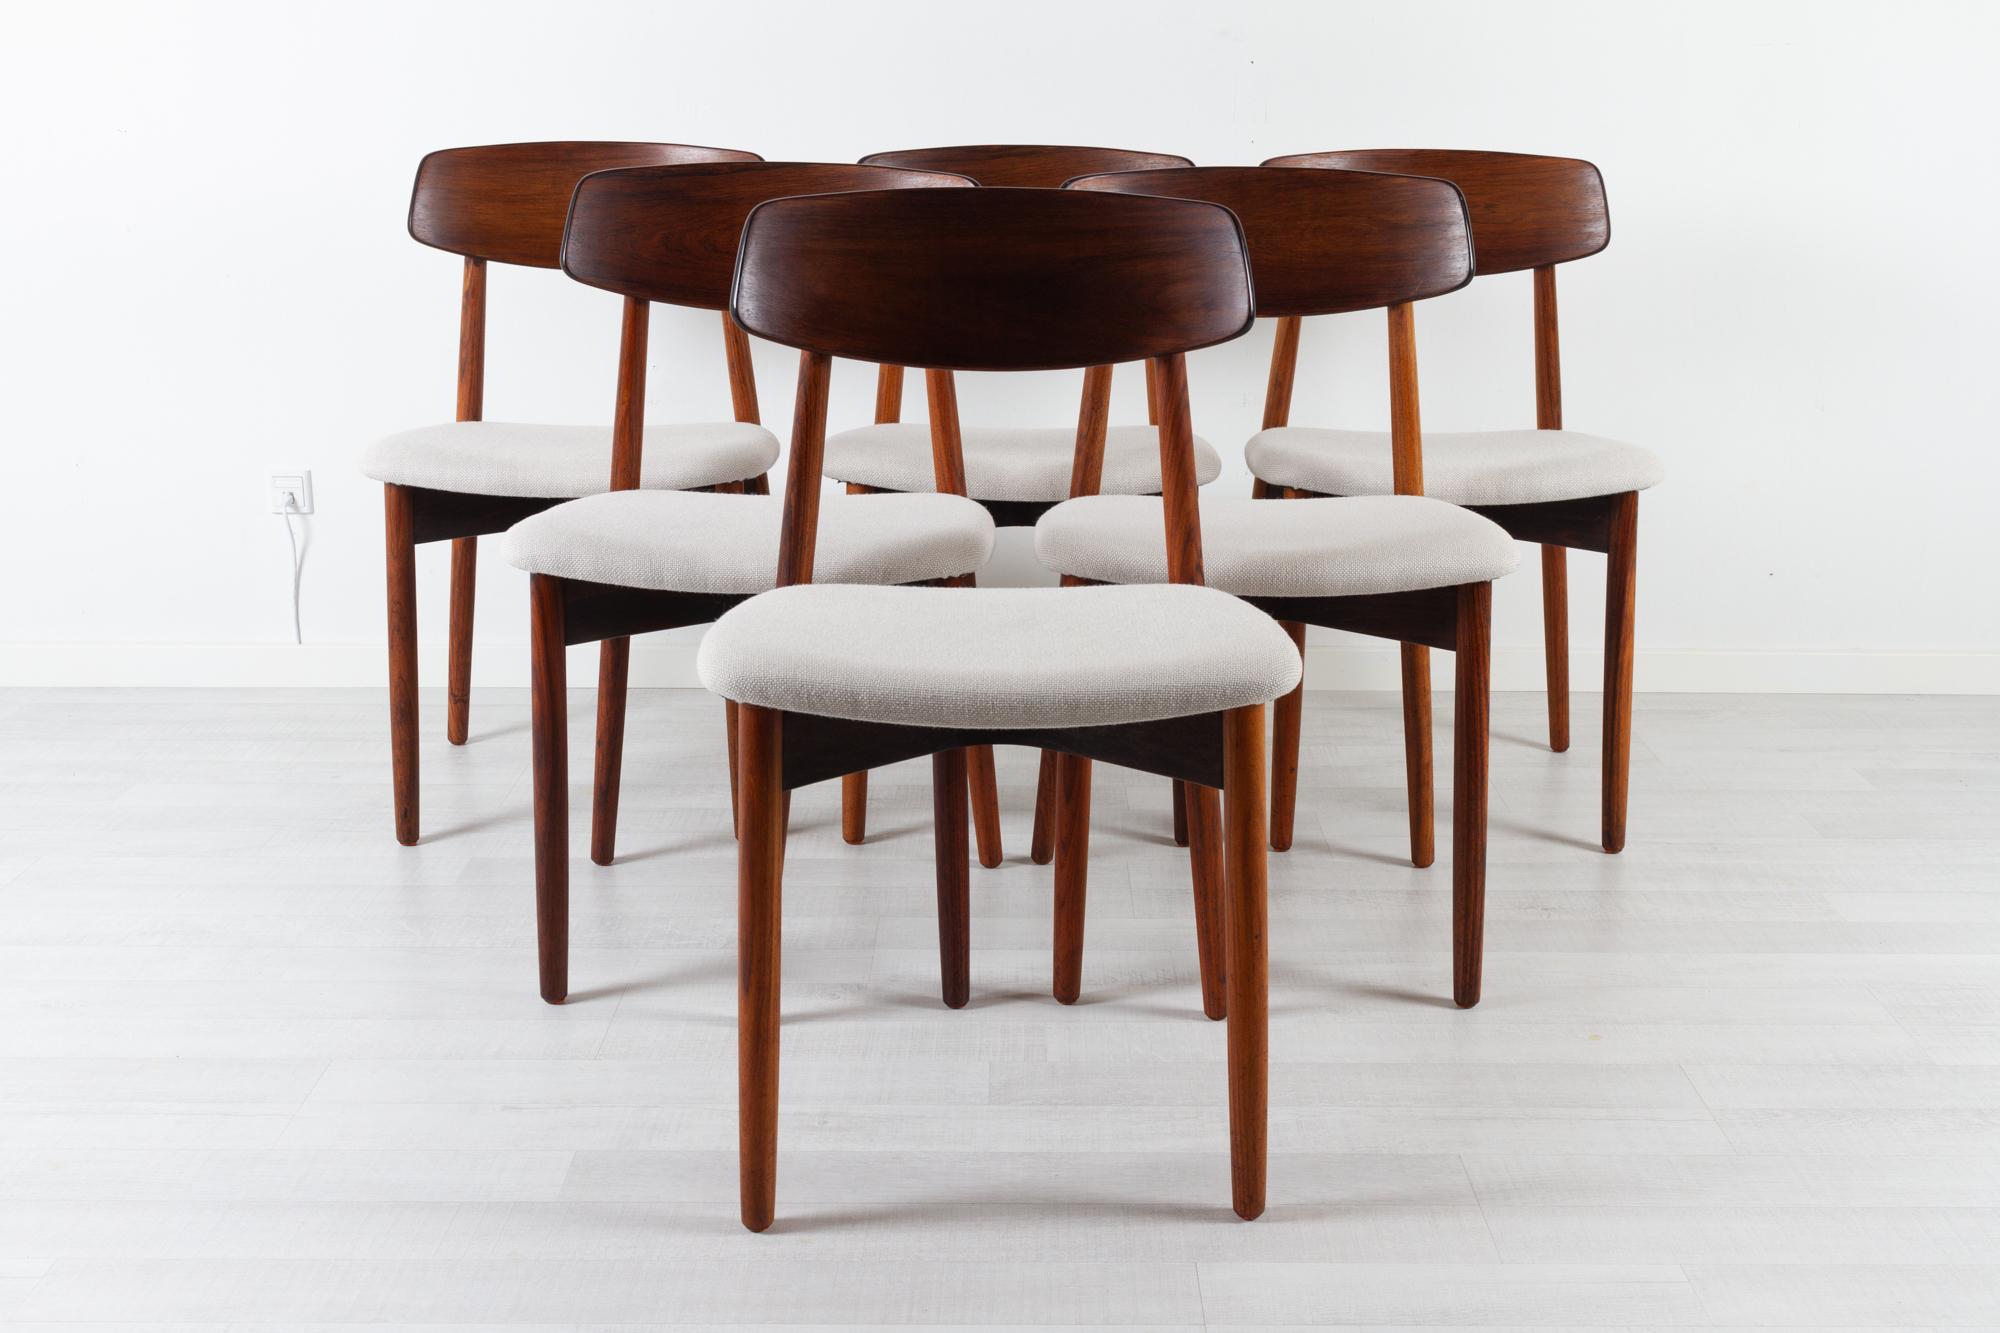 Vintage Danish rosewood dining chairs by Harry Østergaard for Randers Møbelfabrik, 1960s. Set of 6.
Very elegant Mid-Century Modern chairs, with curved backrests in beautiful rosewood veneer. Thin round tapered legs in solid rosewood. Slightly